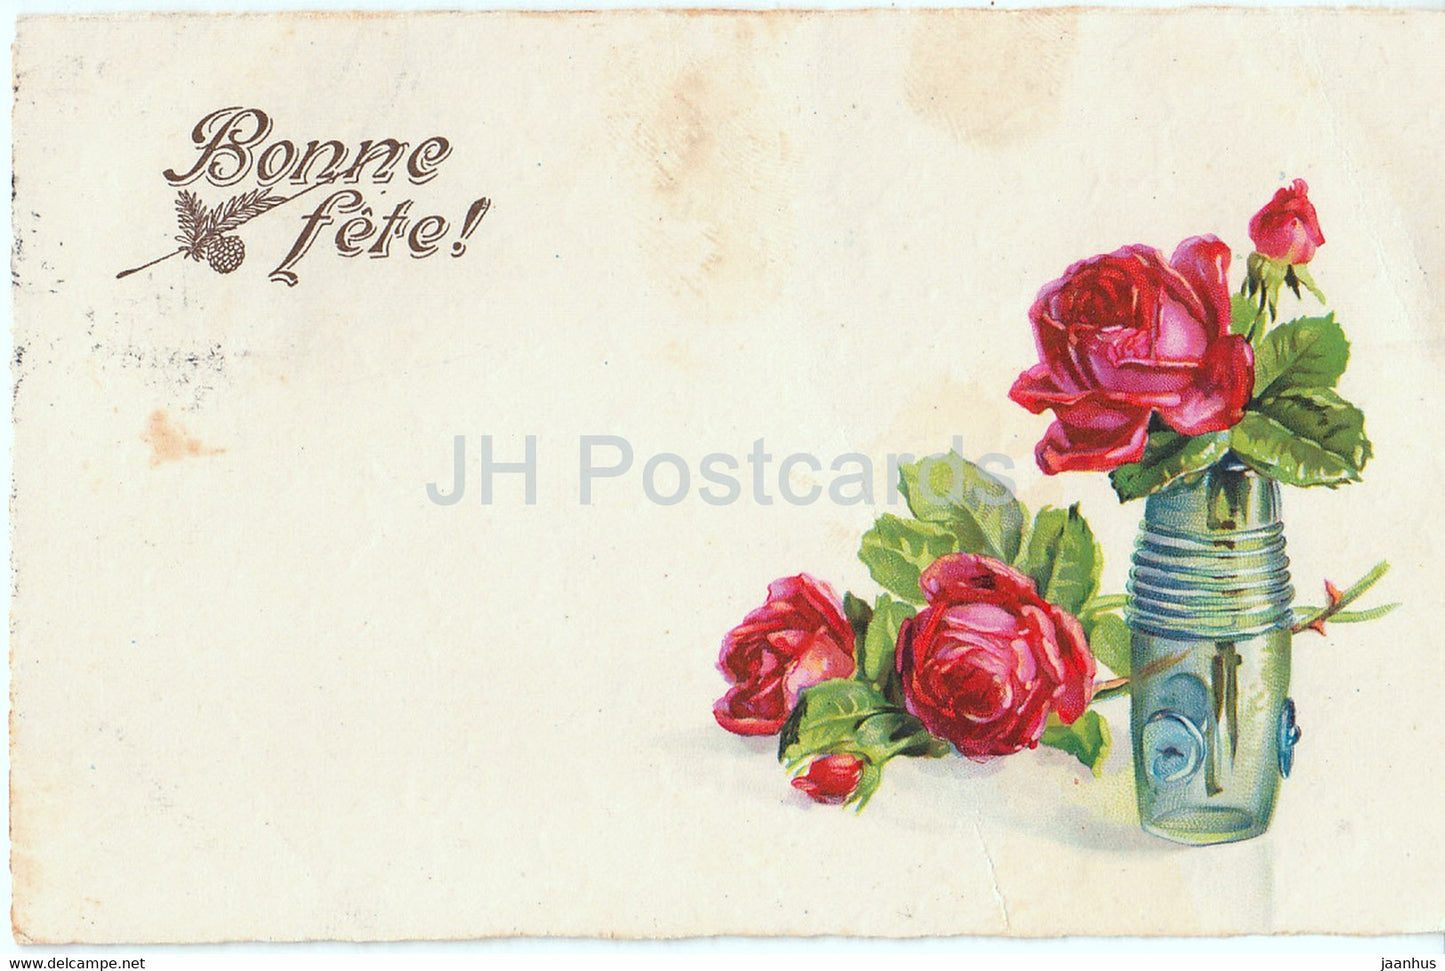 Birthday Greeting Card - Bonne Fete - roses - flowers - BNK 3561 - old postcard - 1935 - France - used - JH Postcards